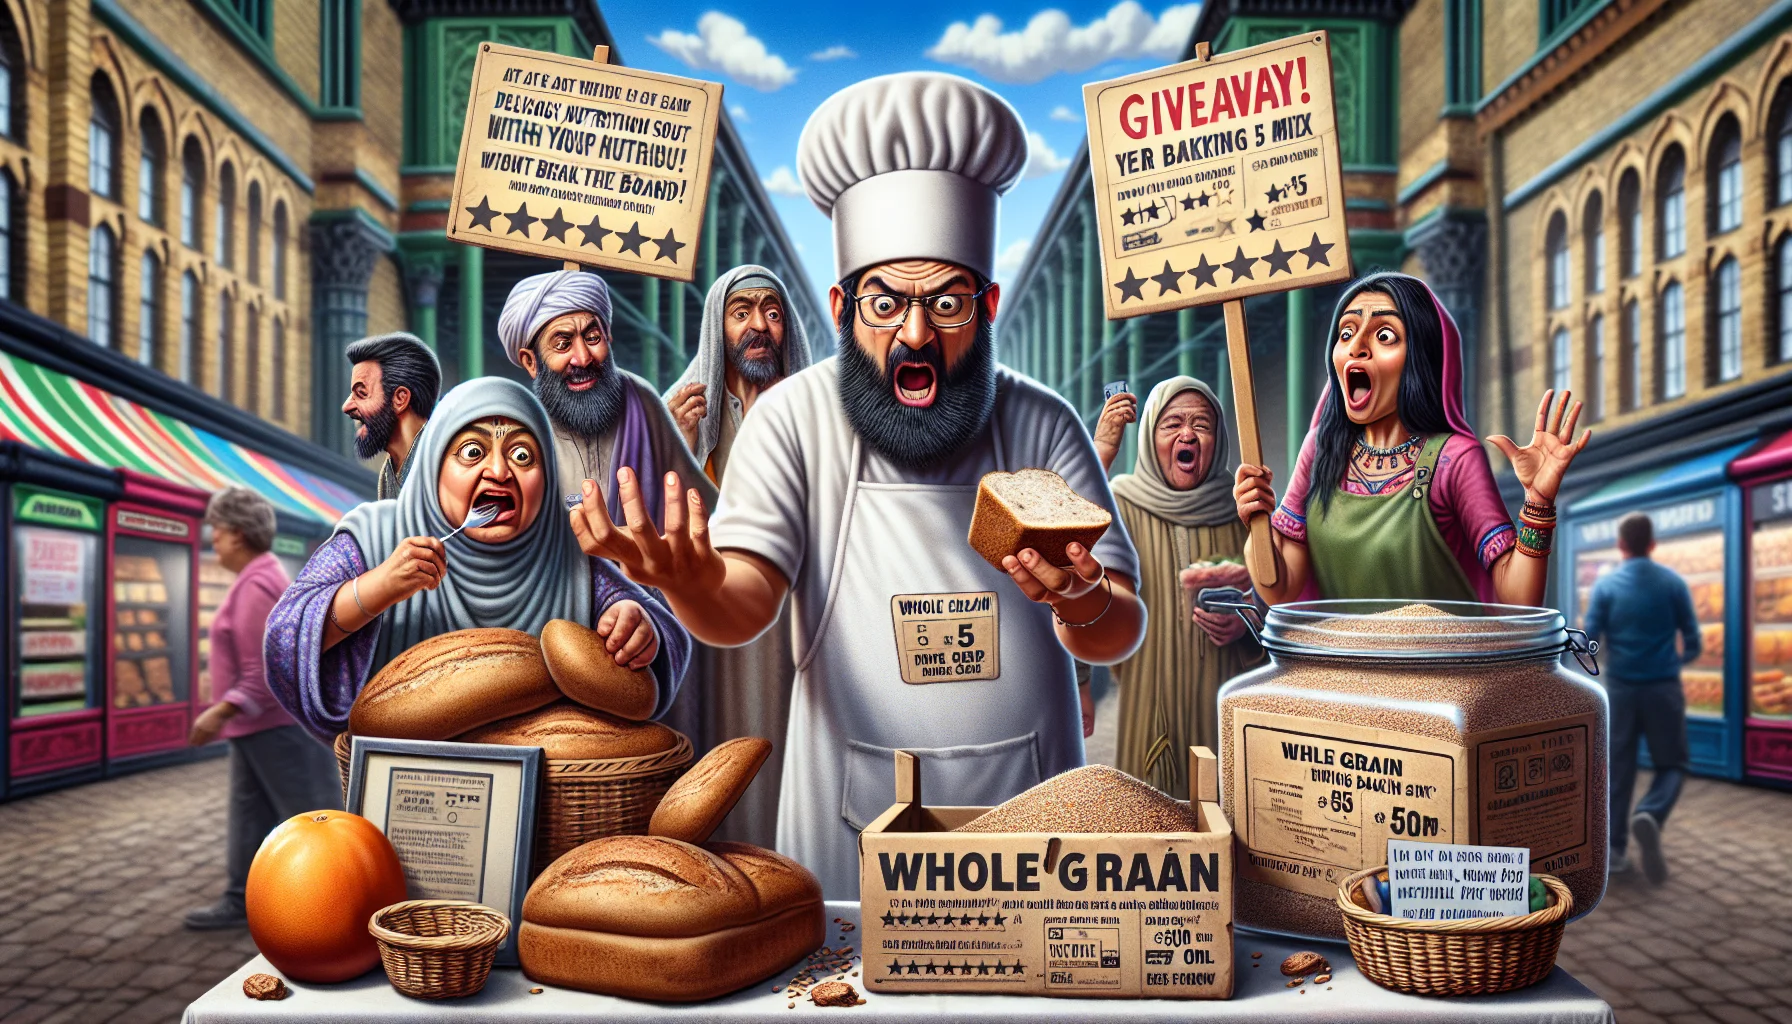 Imagine a humorous scene on a bustling marketplace, with a prominent stand promoting a 'Whole Grain Baking Mix Giveaway'. A Middle-Eastern male vendor, humorously dressed in a chef's hat and apron, enthusiastically presents the baking mix, showcasing its rich ingredients. Next to him, a South Asian female customer is trying a bite of the bread baked from this mix, her face expressing surprise and delight. Nearby is a large poster, playfully mimicking the online interface of an Etsy review, rating the baking mix five stars and praising it as 'delicious, nutritious and affordable.' This scene gently teases the viewer, motivating them to eat healthy without breaking the bank.